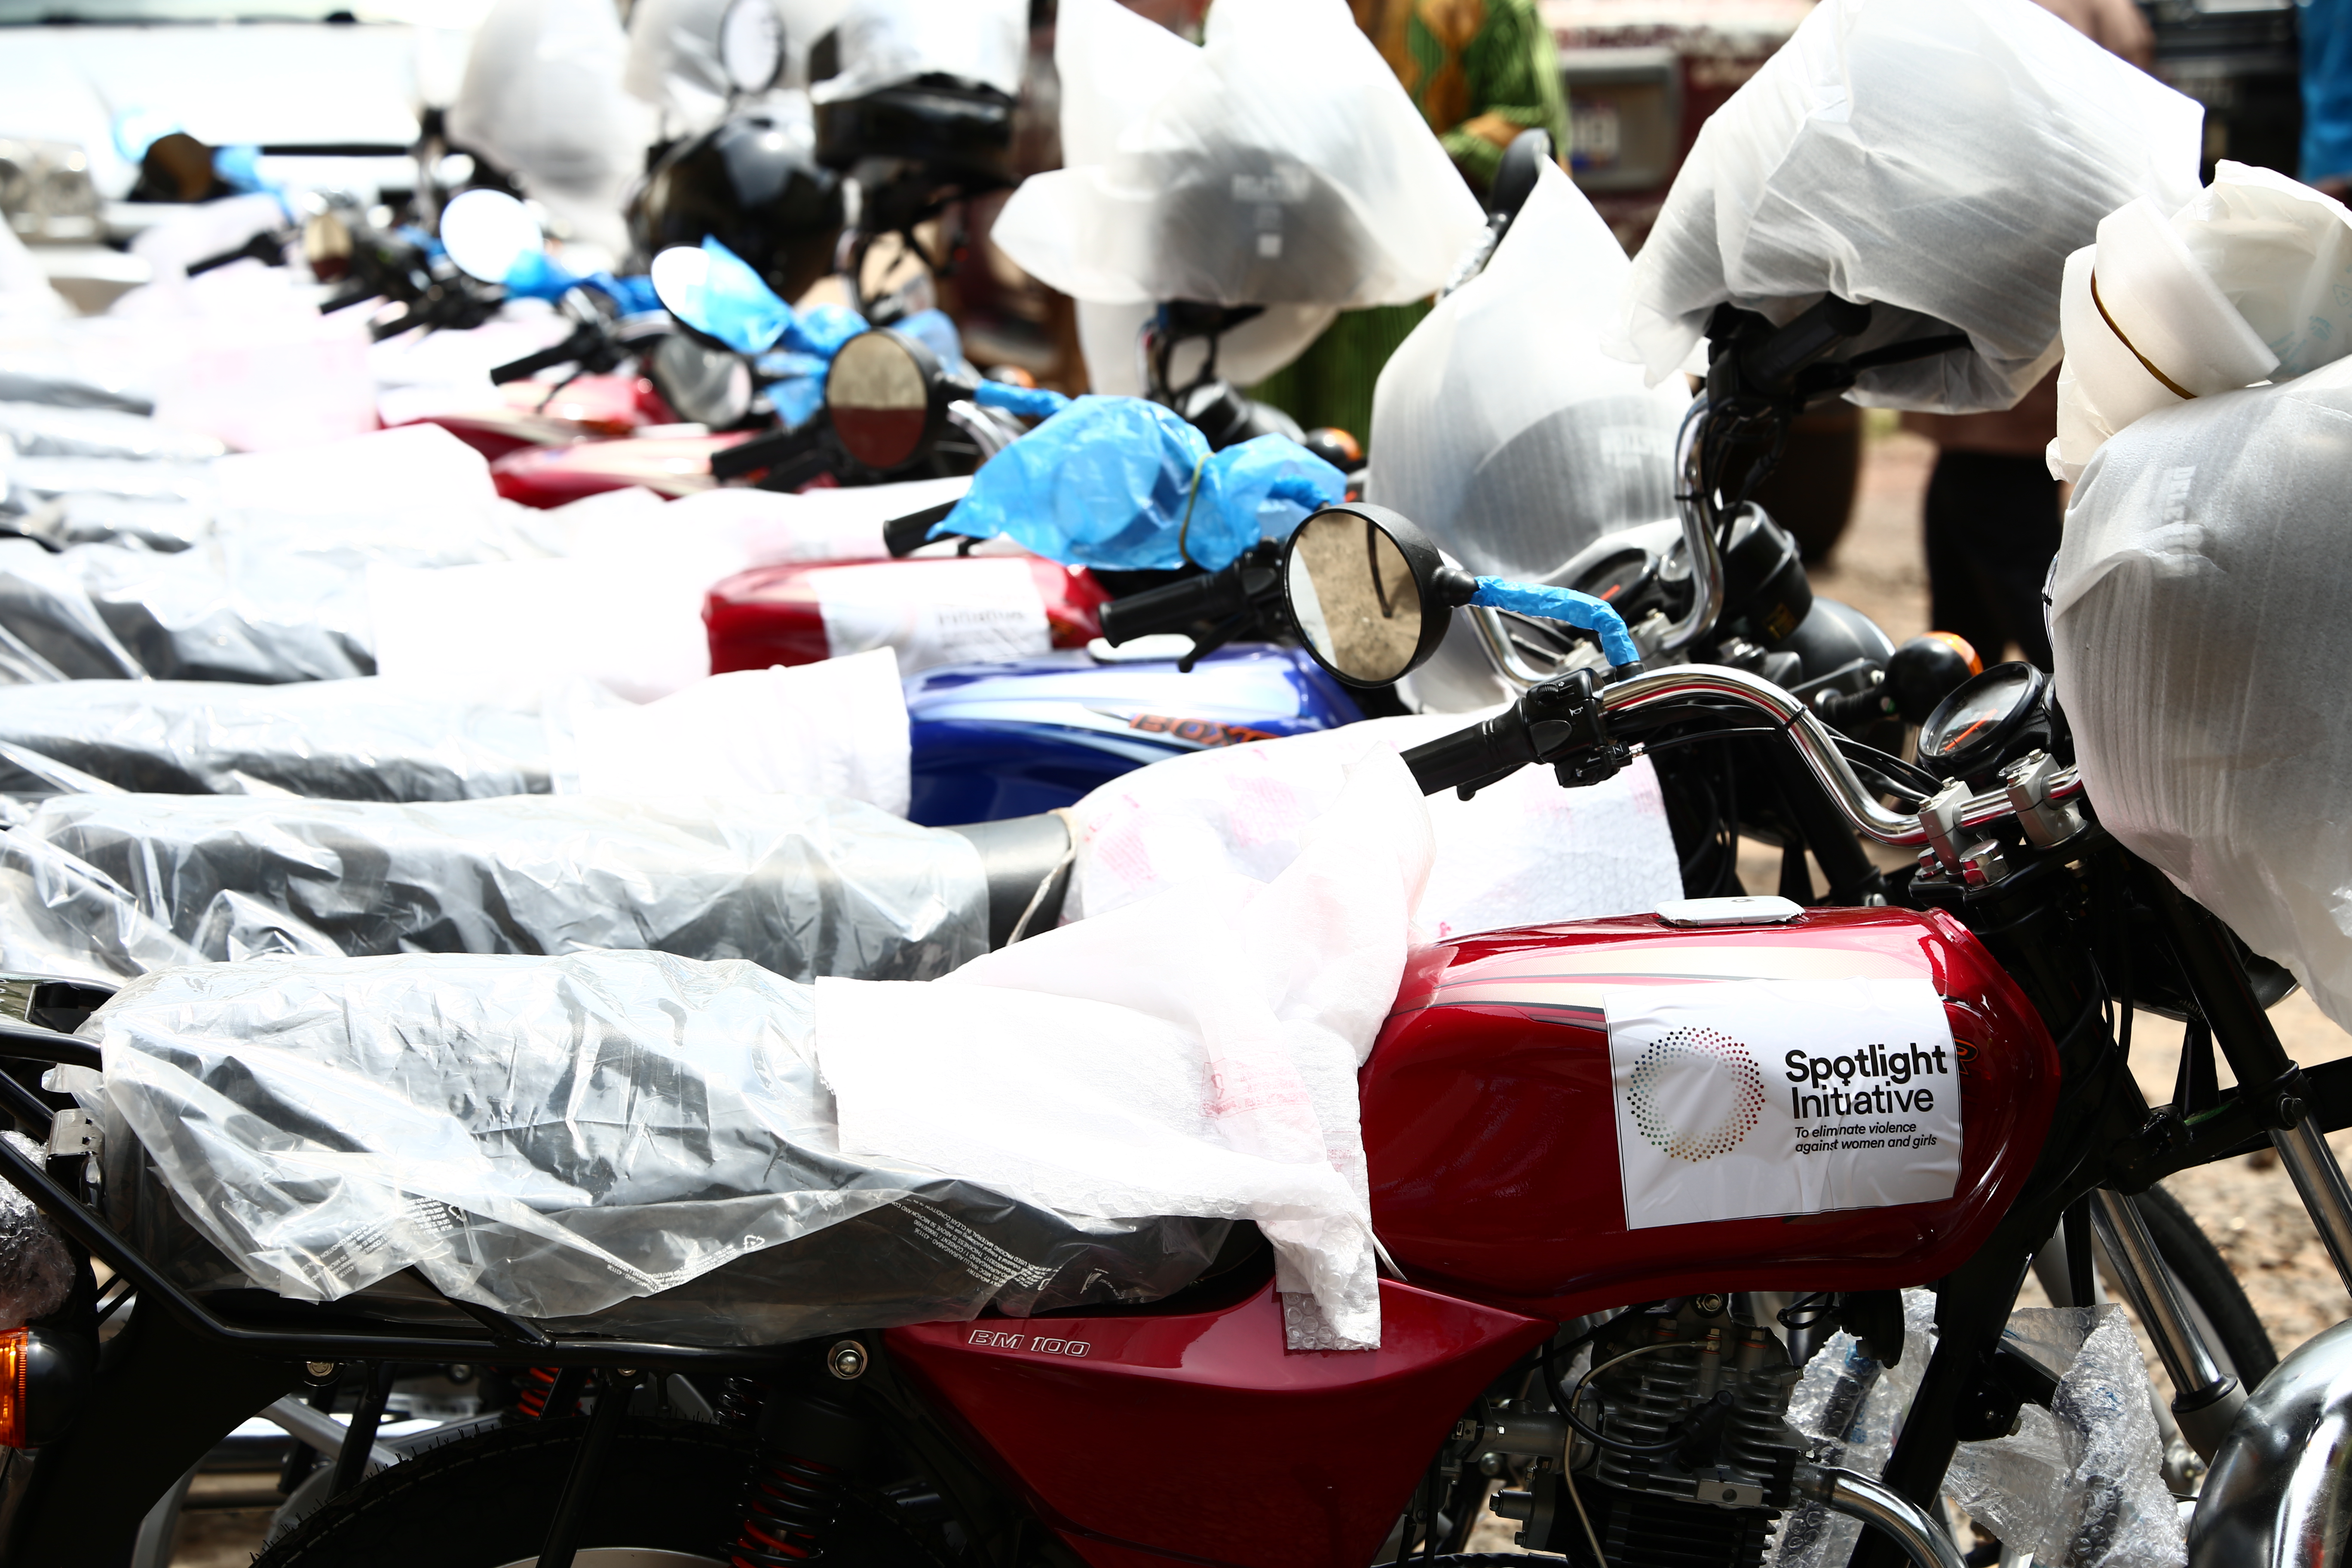 Motorbikes donated by UN Women to the Ministry of Internal Affairs and the National Council of Chiefs and Elders of Liberia on Friday 15 May 2020, to enable them to monitor the closure of Bush schools and to conduct community awareness on sexual and gender-based violence and COVID-19 in Liberia. Photo: UN Women Liberia